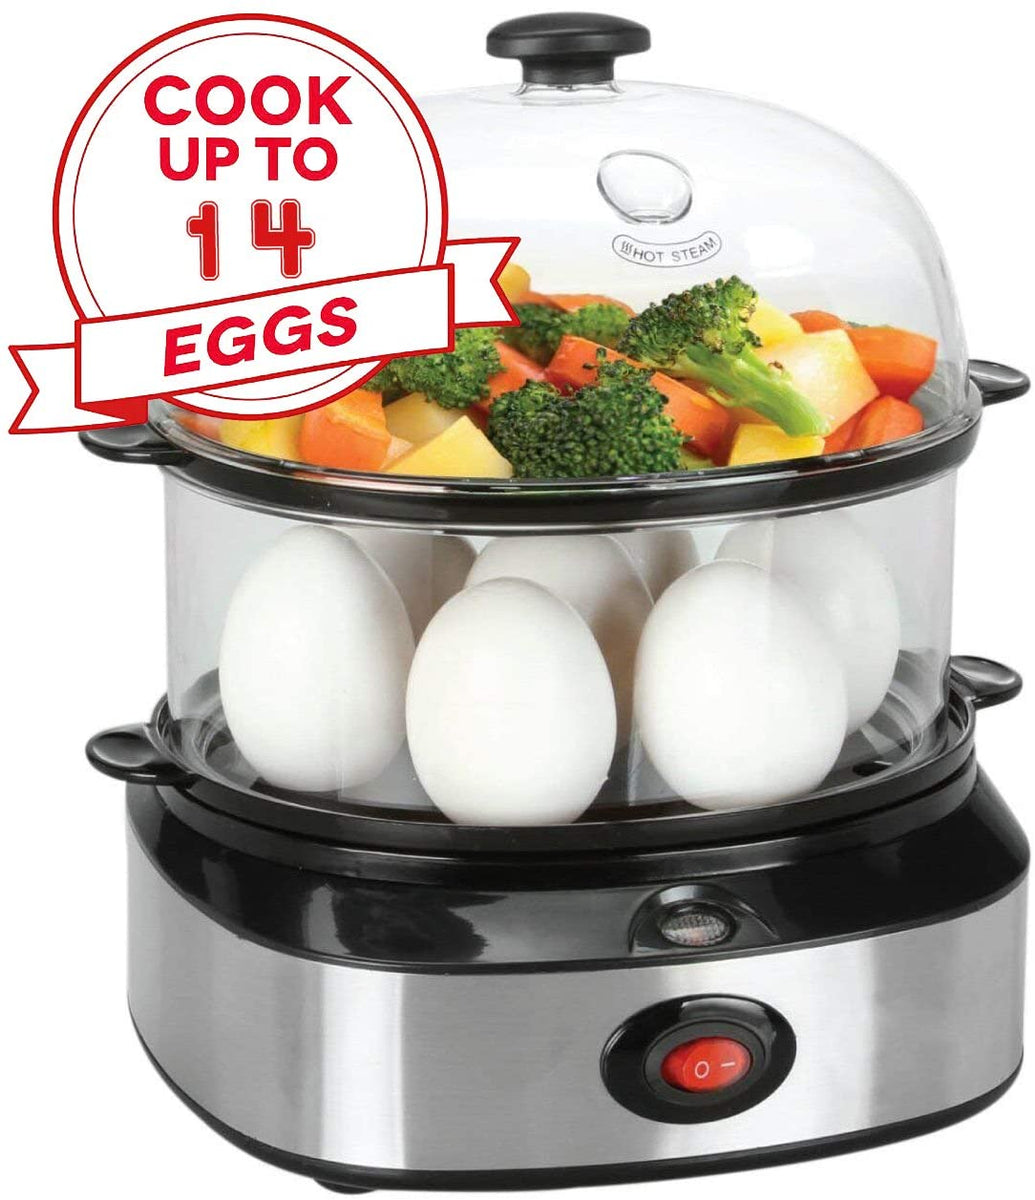 CNNRug egg boiler Egg Boilers, Scheduled Egg Cooker Appointment Steamer  Automatic Power Off Breakfast Machine Multifunction Non-Stick Pan for  Perfect